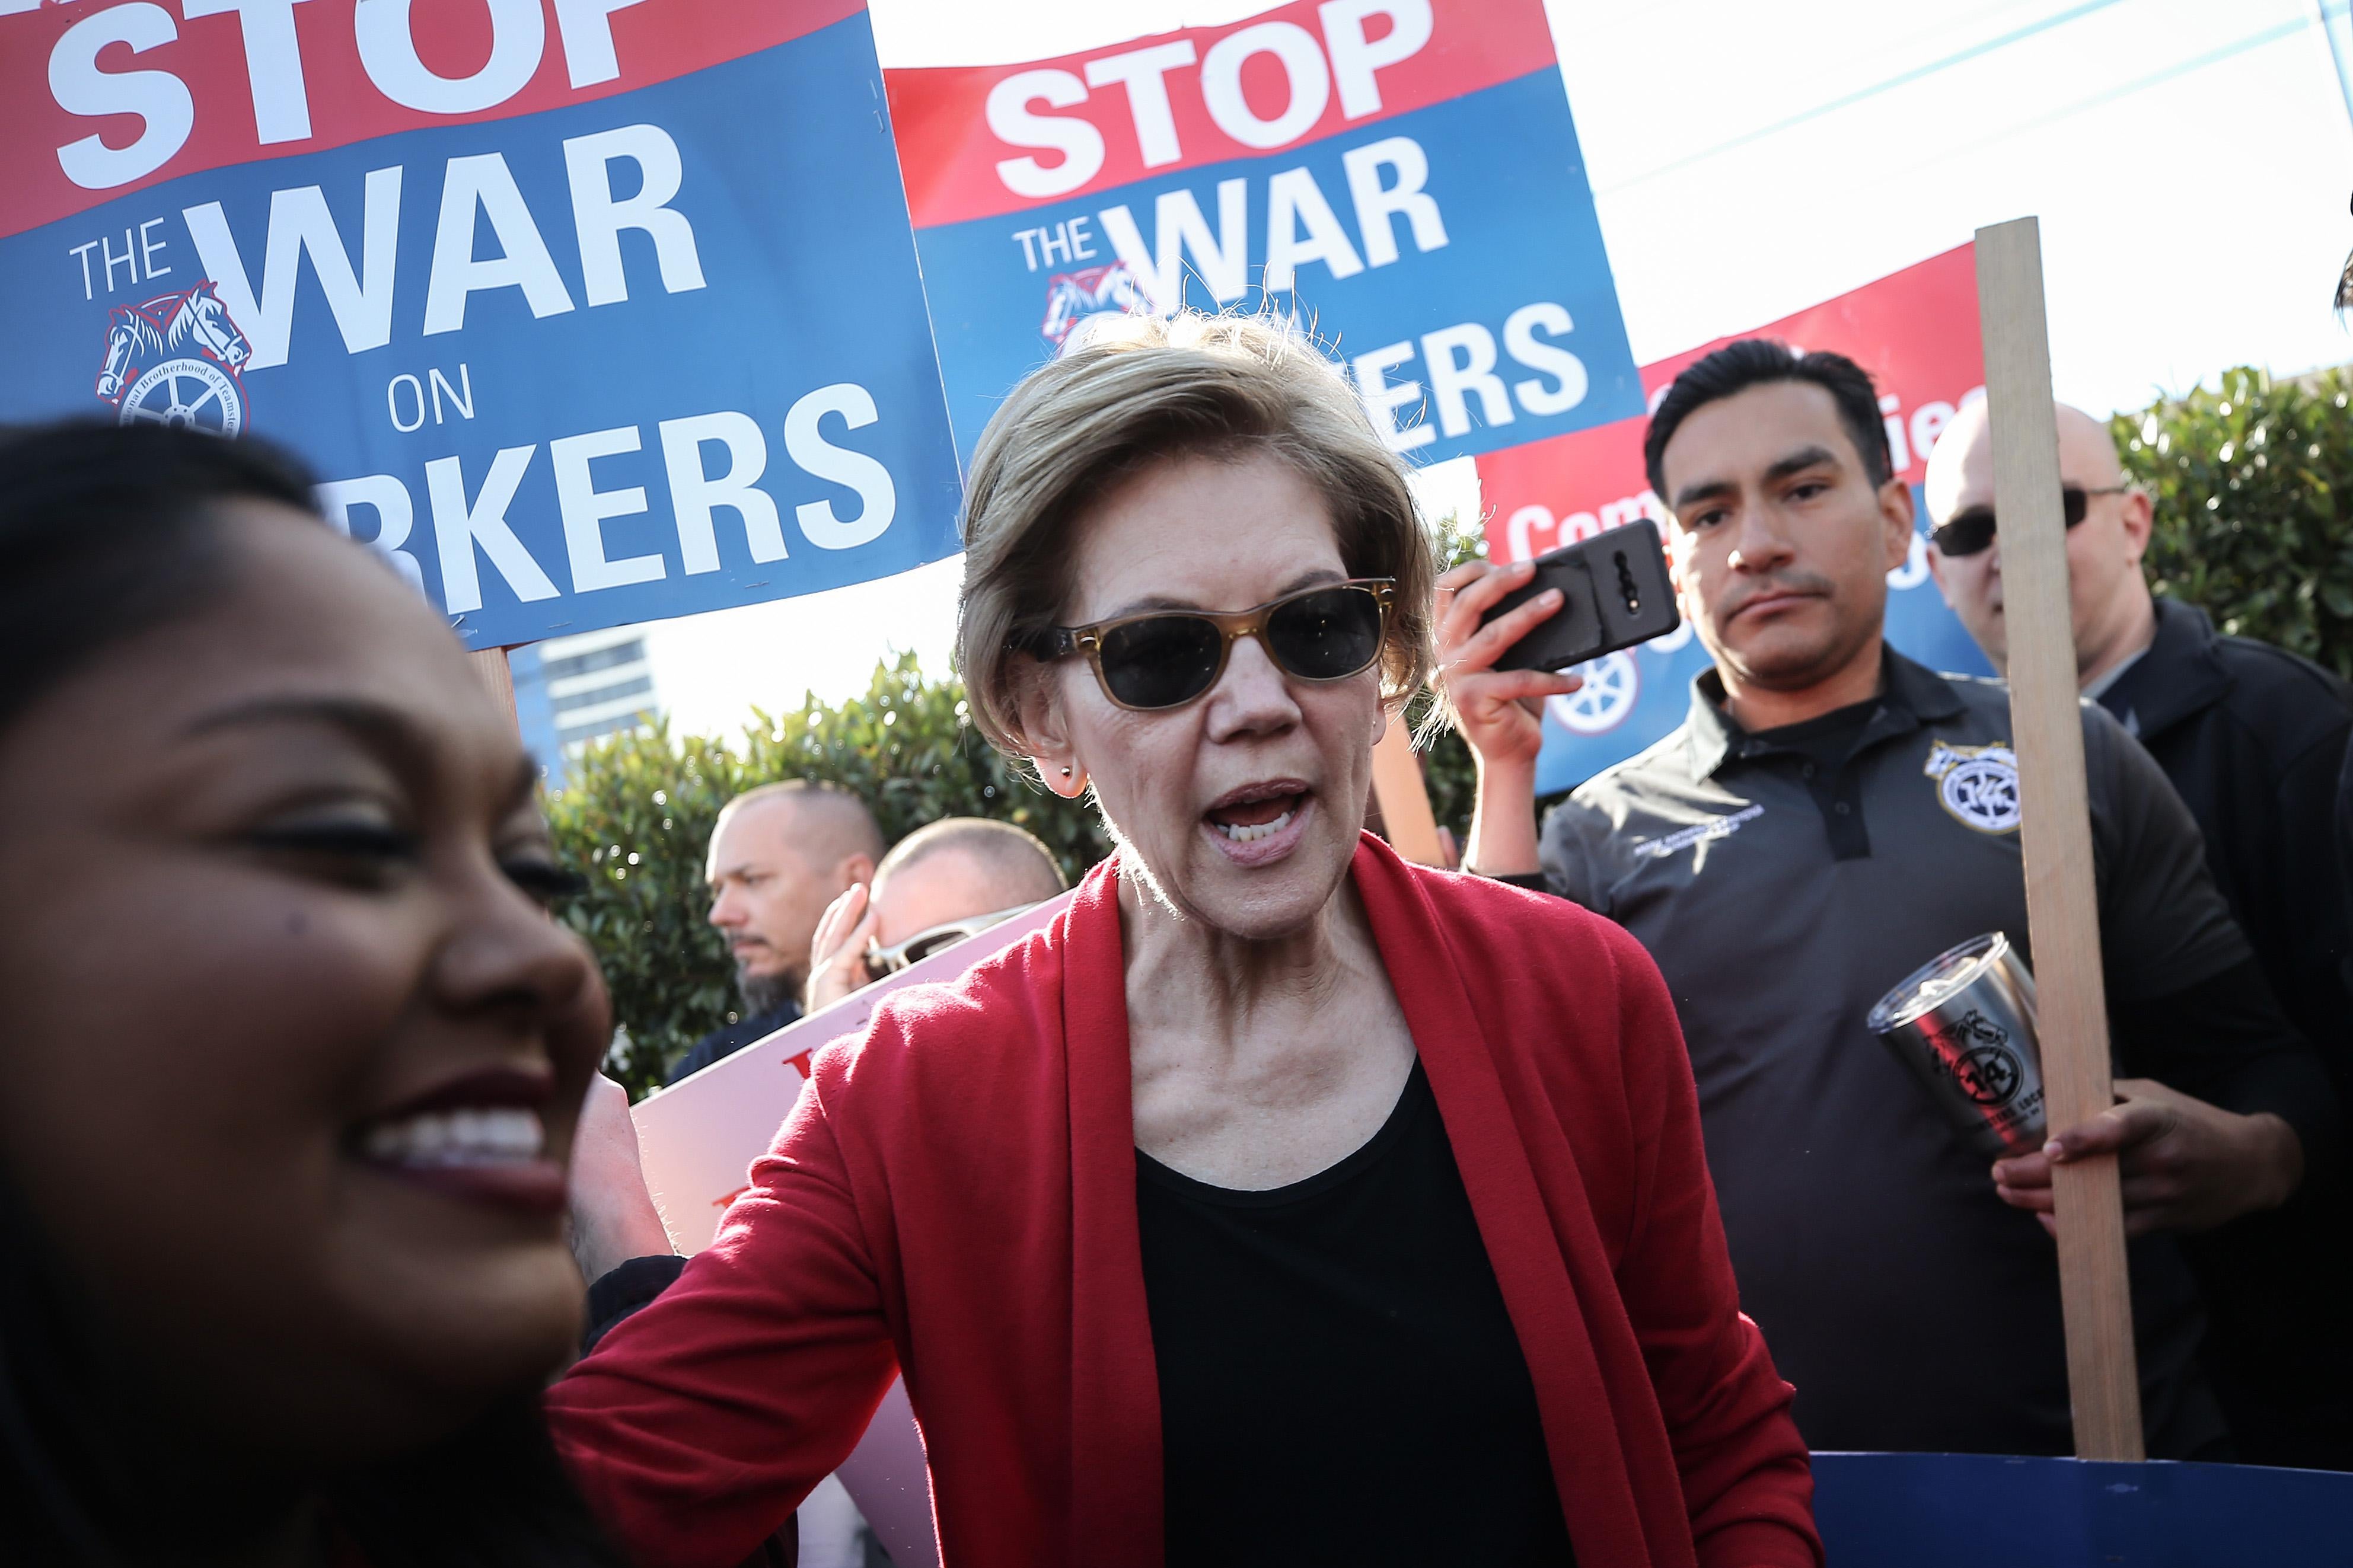 Sen. Warren in sunglasses marching, chanting, and carrying a picket.